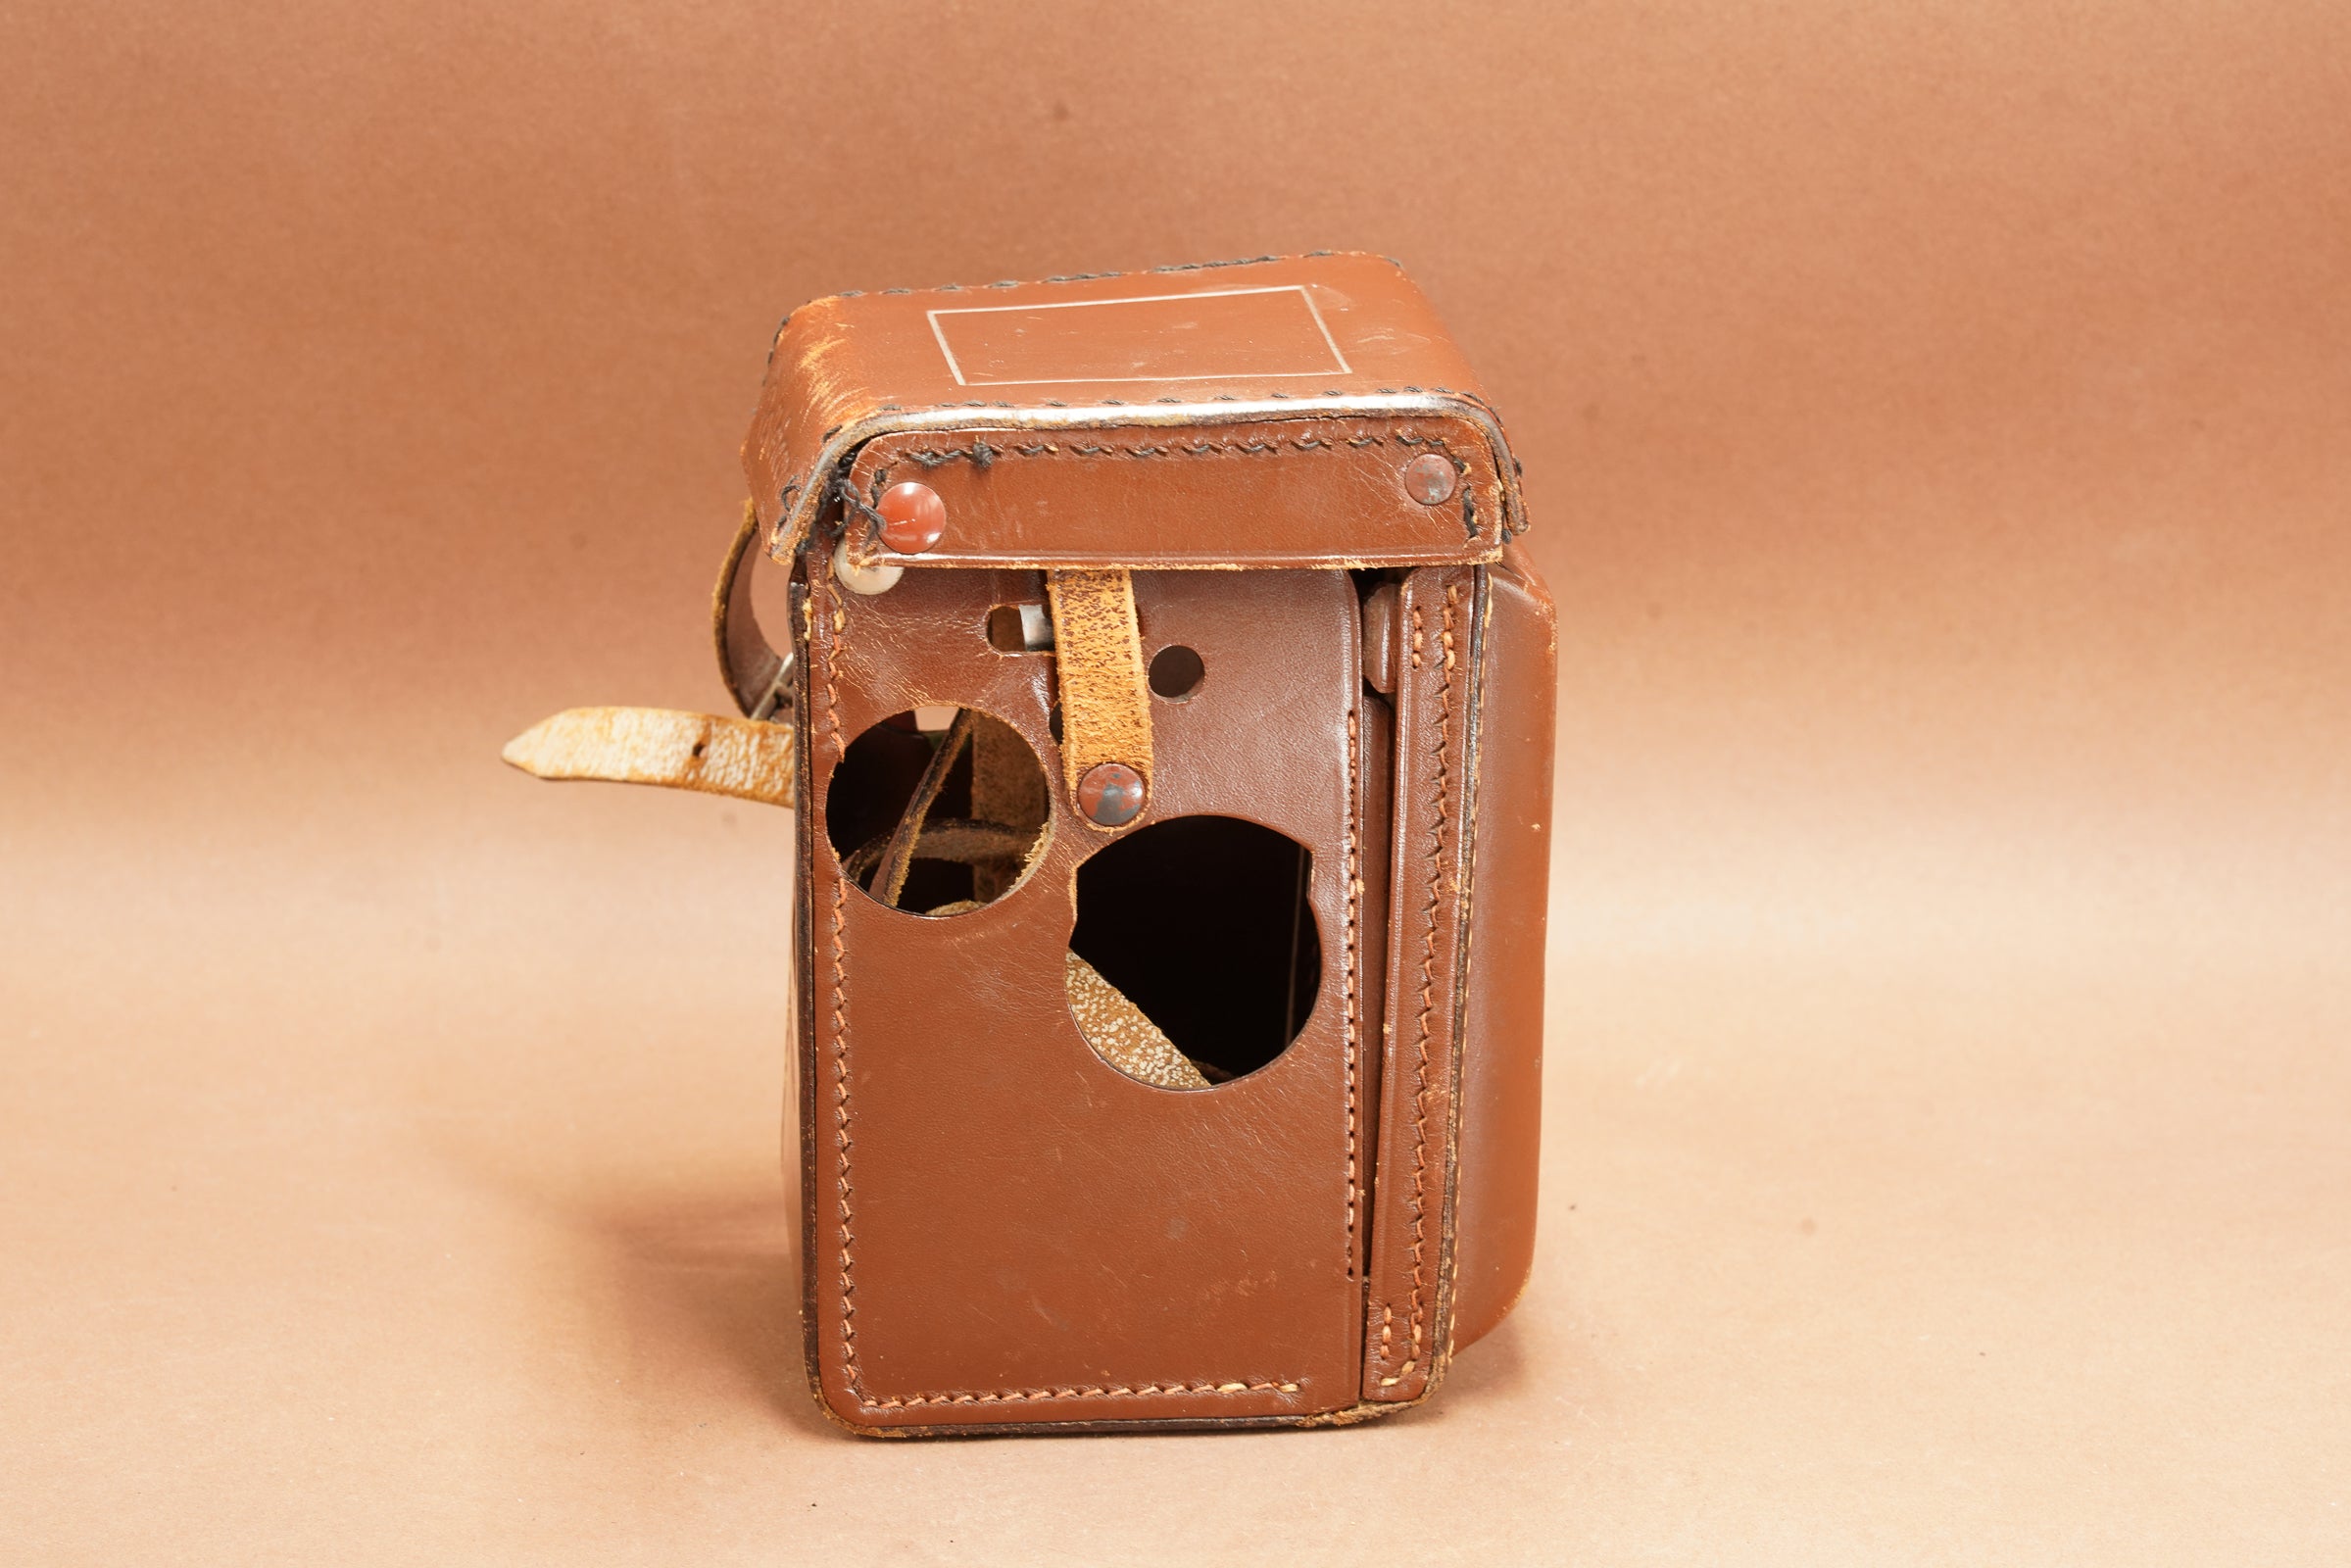 LEATHER CASE for ROLLEICORD TLR medium format system